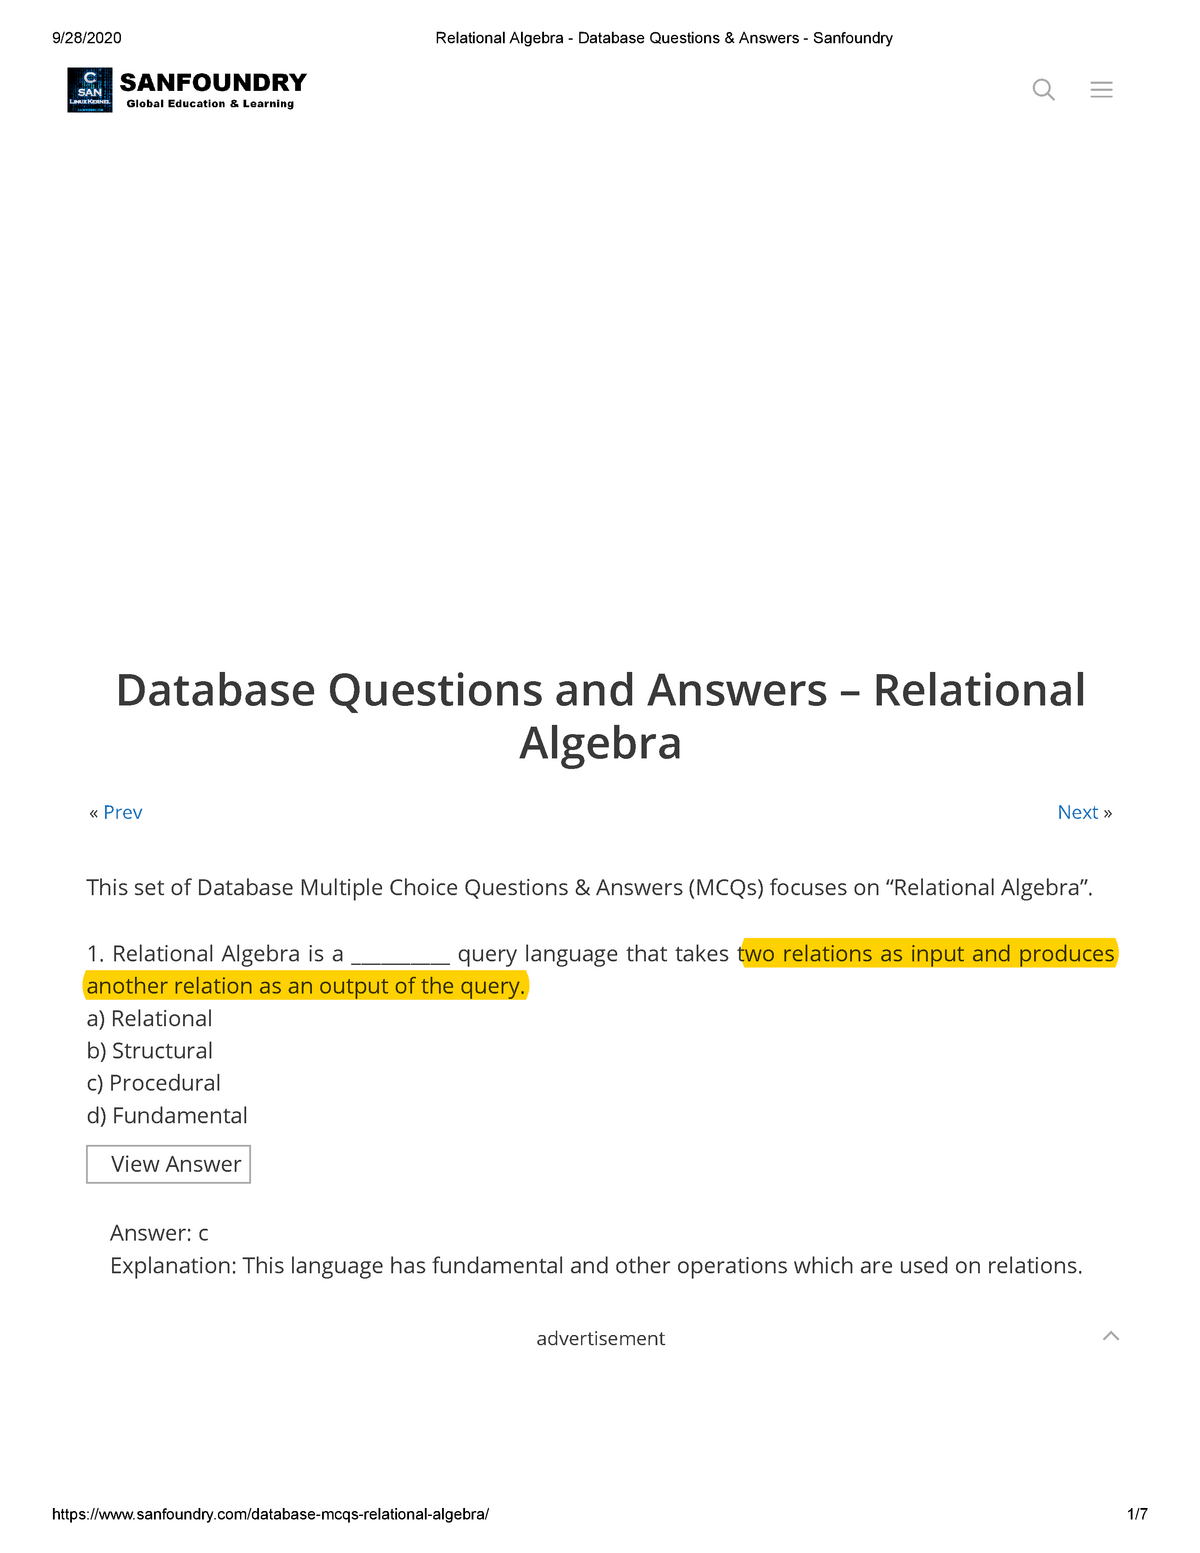 dbms mcq questions and answers pdf